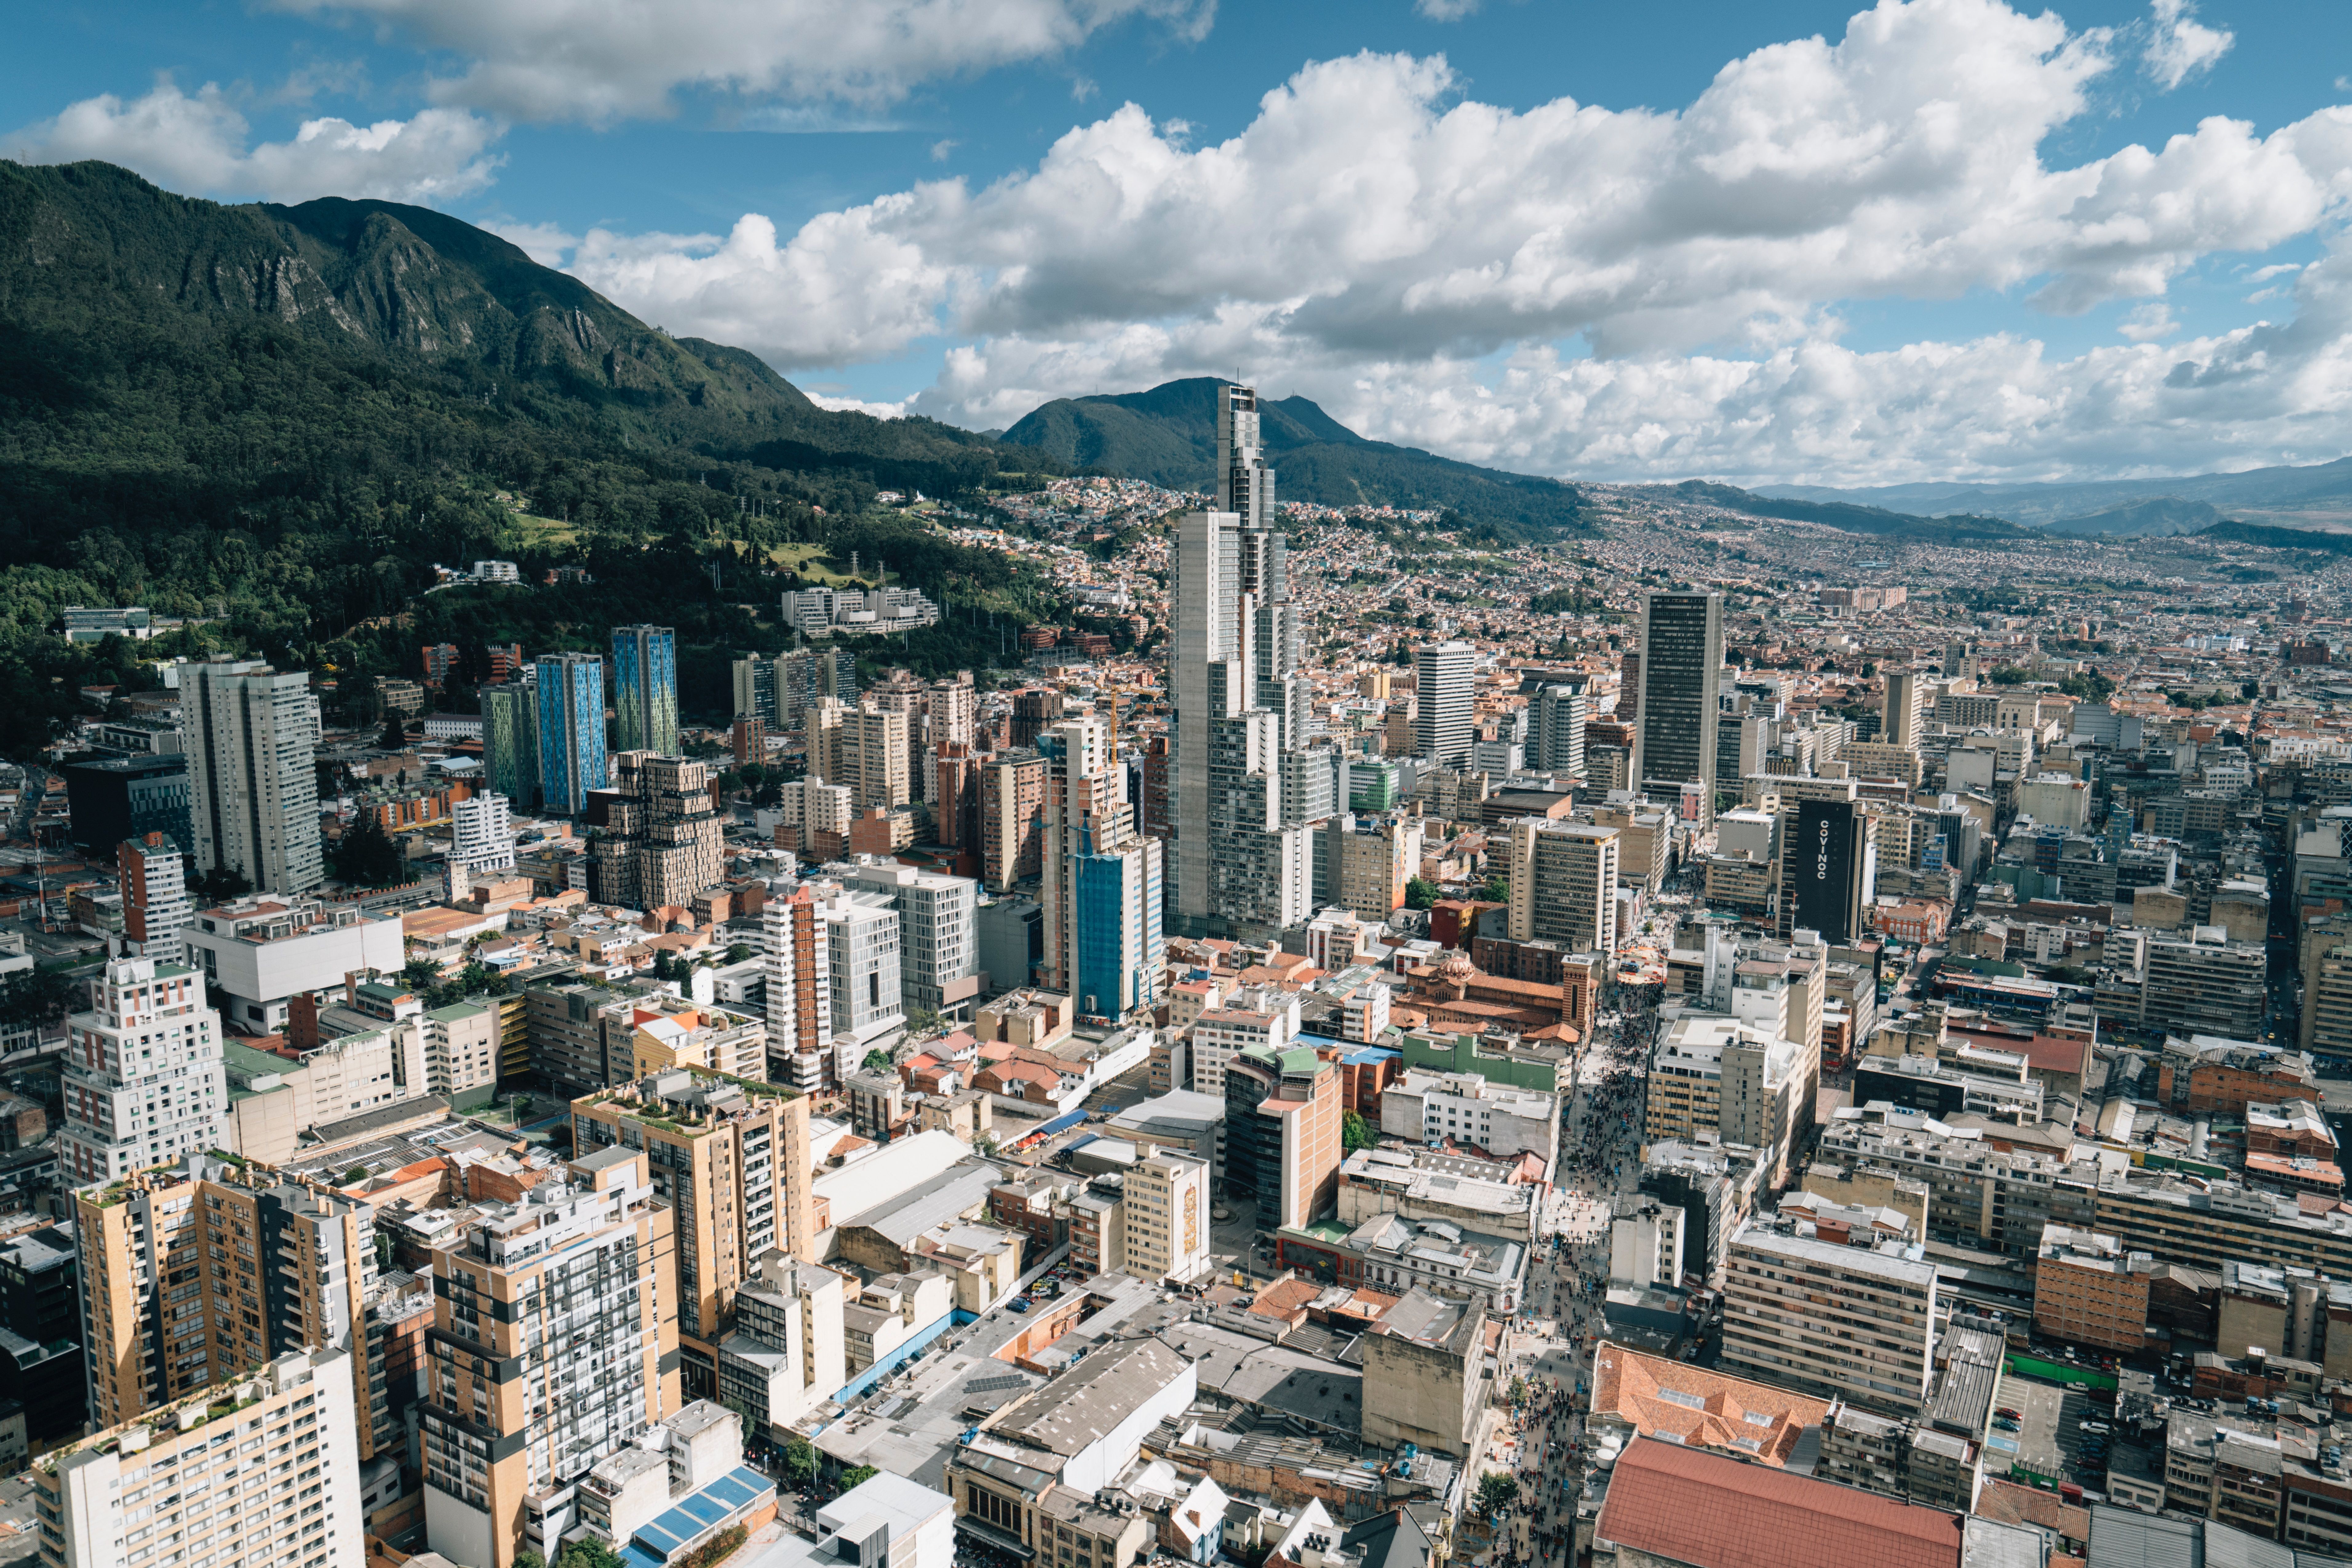 The city of Bogota, Colombia 